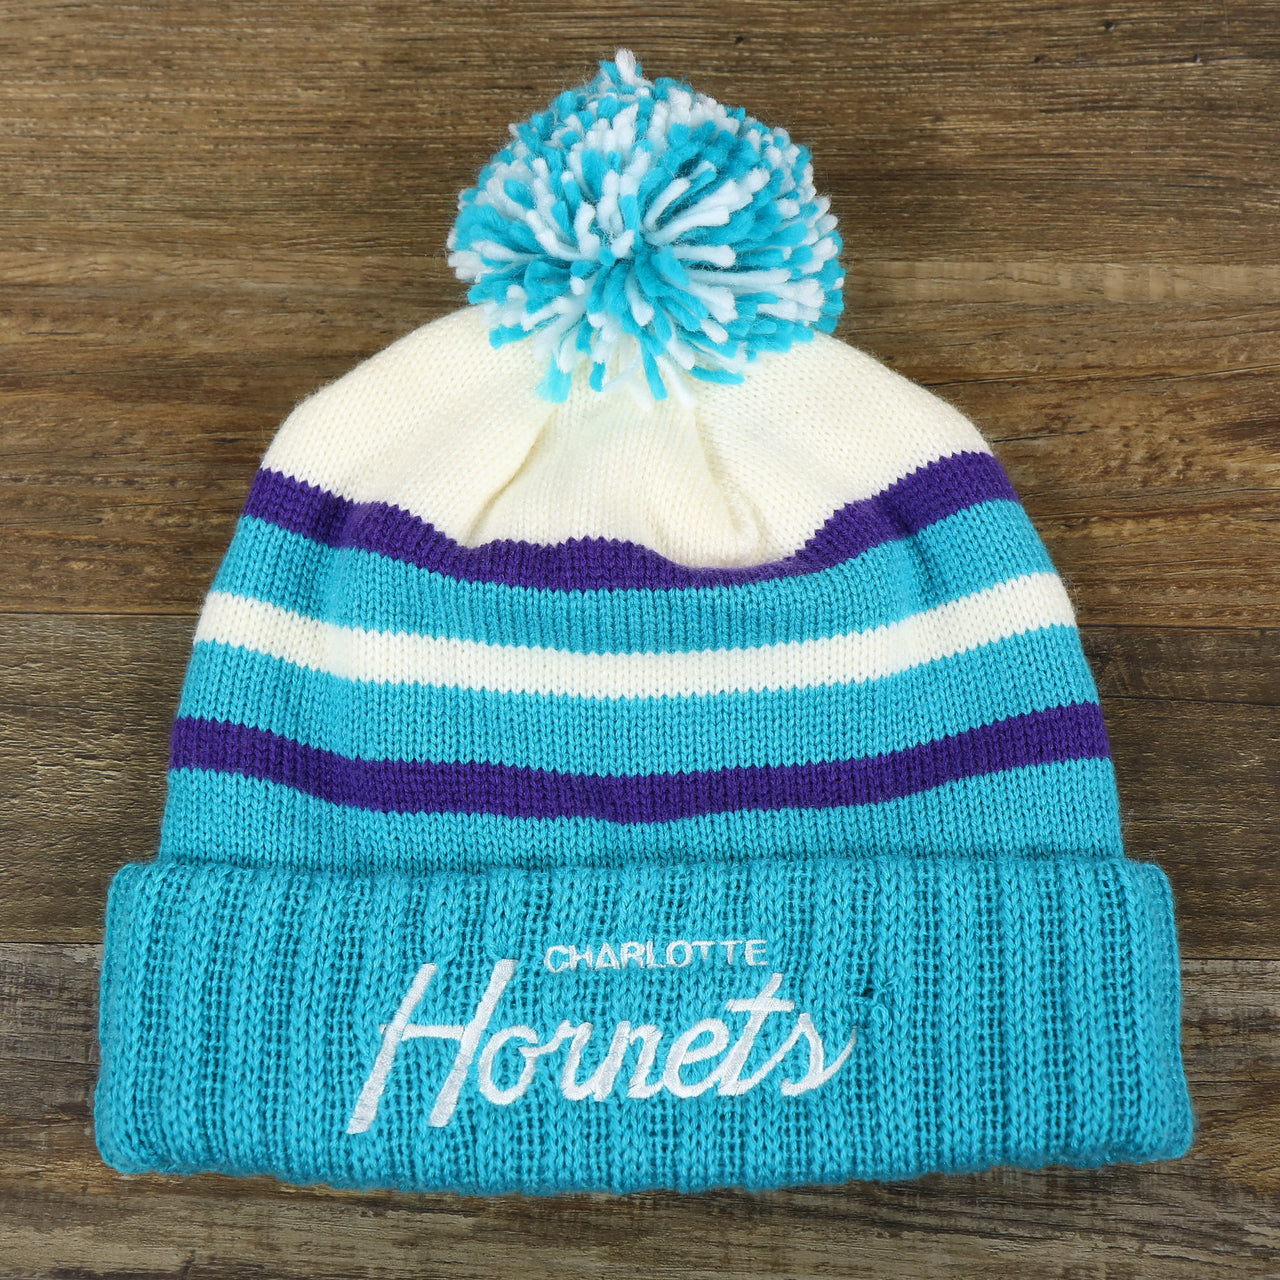 The front of the Charlotte Hornets Cursive Wordmark Teal Blue Cuff Pom Pom Winter Beanie | Teal Blue Striped Winter Beanie